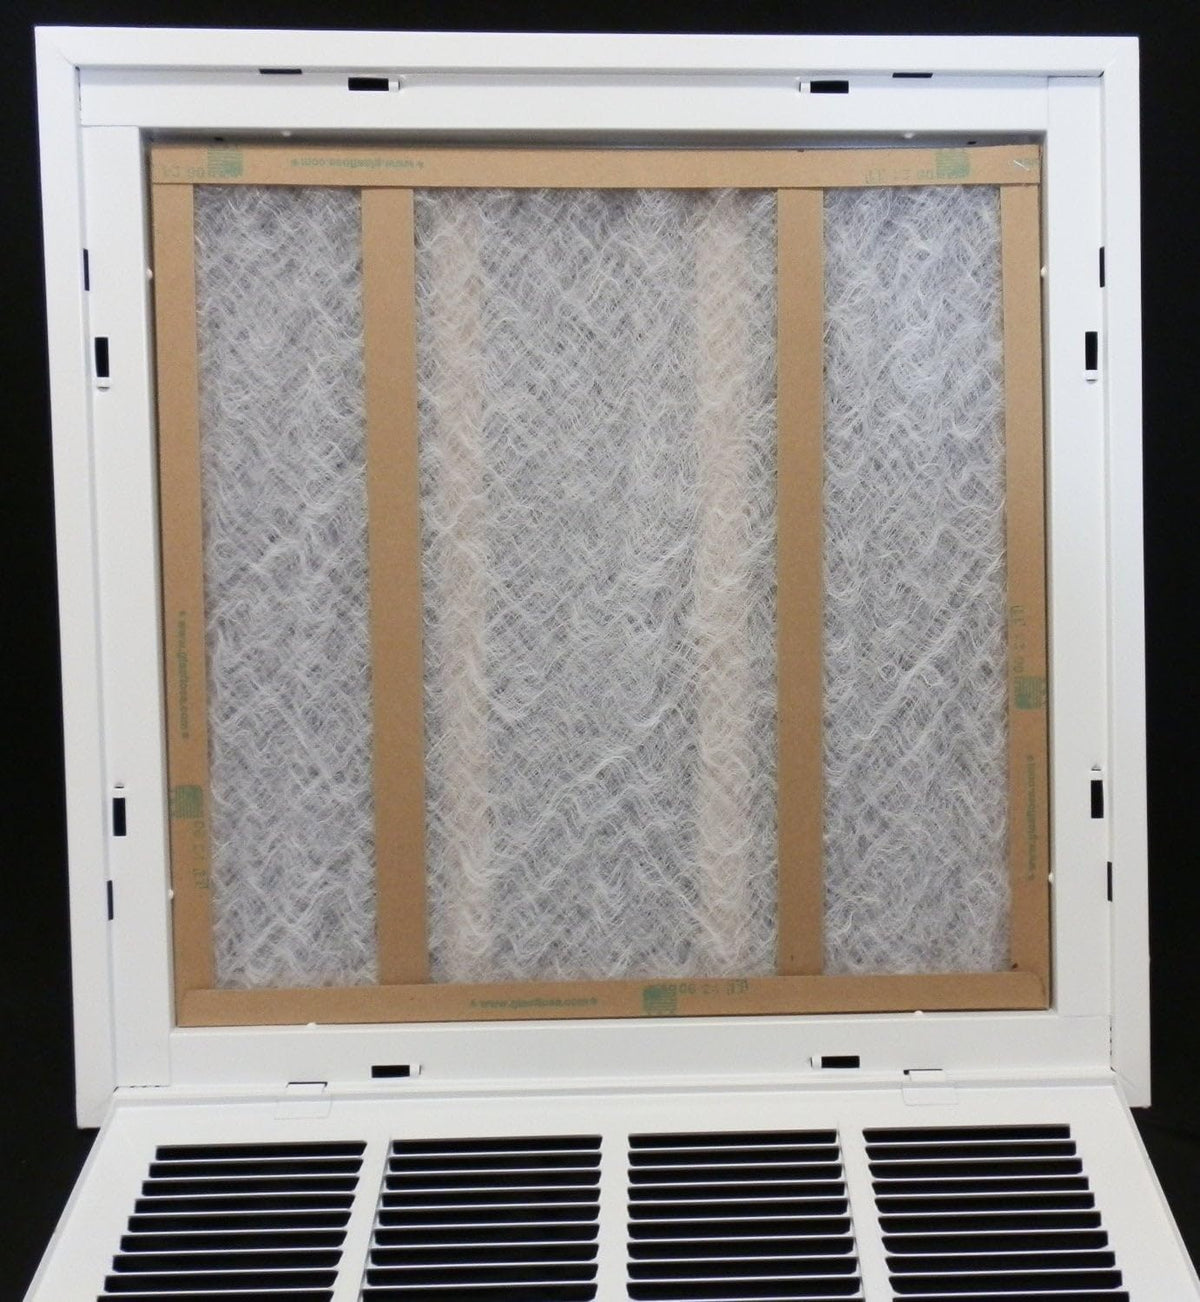 10&quot; X 10&quot; Steel Return Air Filter Grille for 1&quot; Filter - Removable Frame - [Outer Dimensions: 12 5/8&quot; X 12 5/8&quot;]